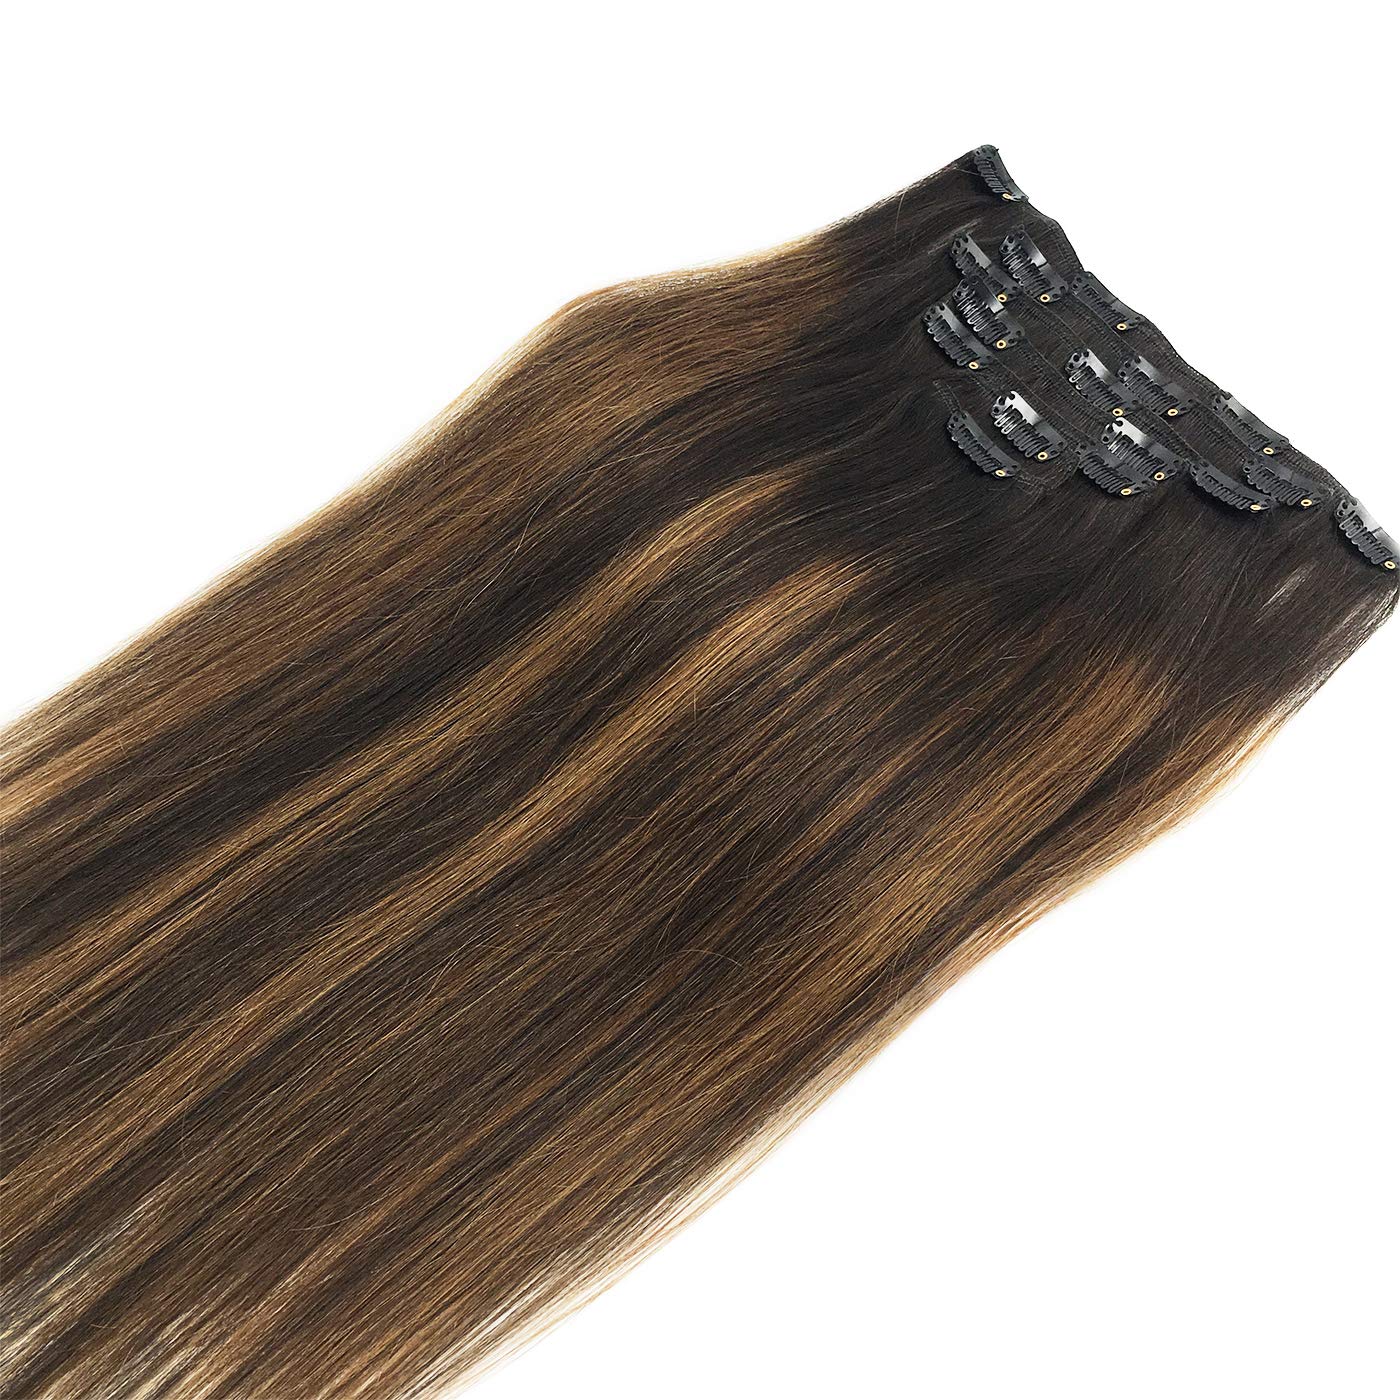 MEEZAA Remy Hair Extensions Clip in Human Hair Ombre Dark Brown to Chestnut Brown 14 Inch 120g 7pcs Straight Real Hair Extensions Natural Hair